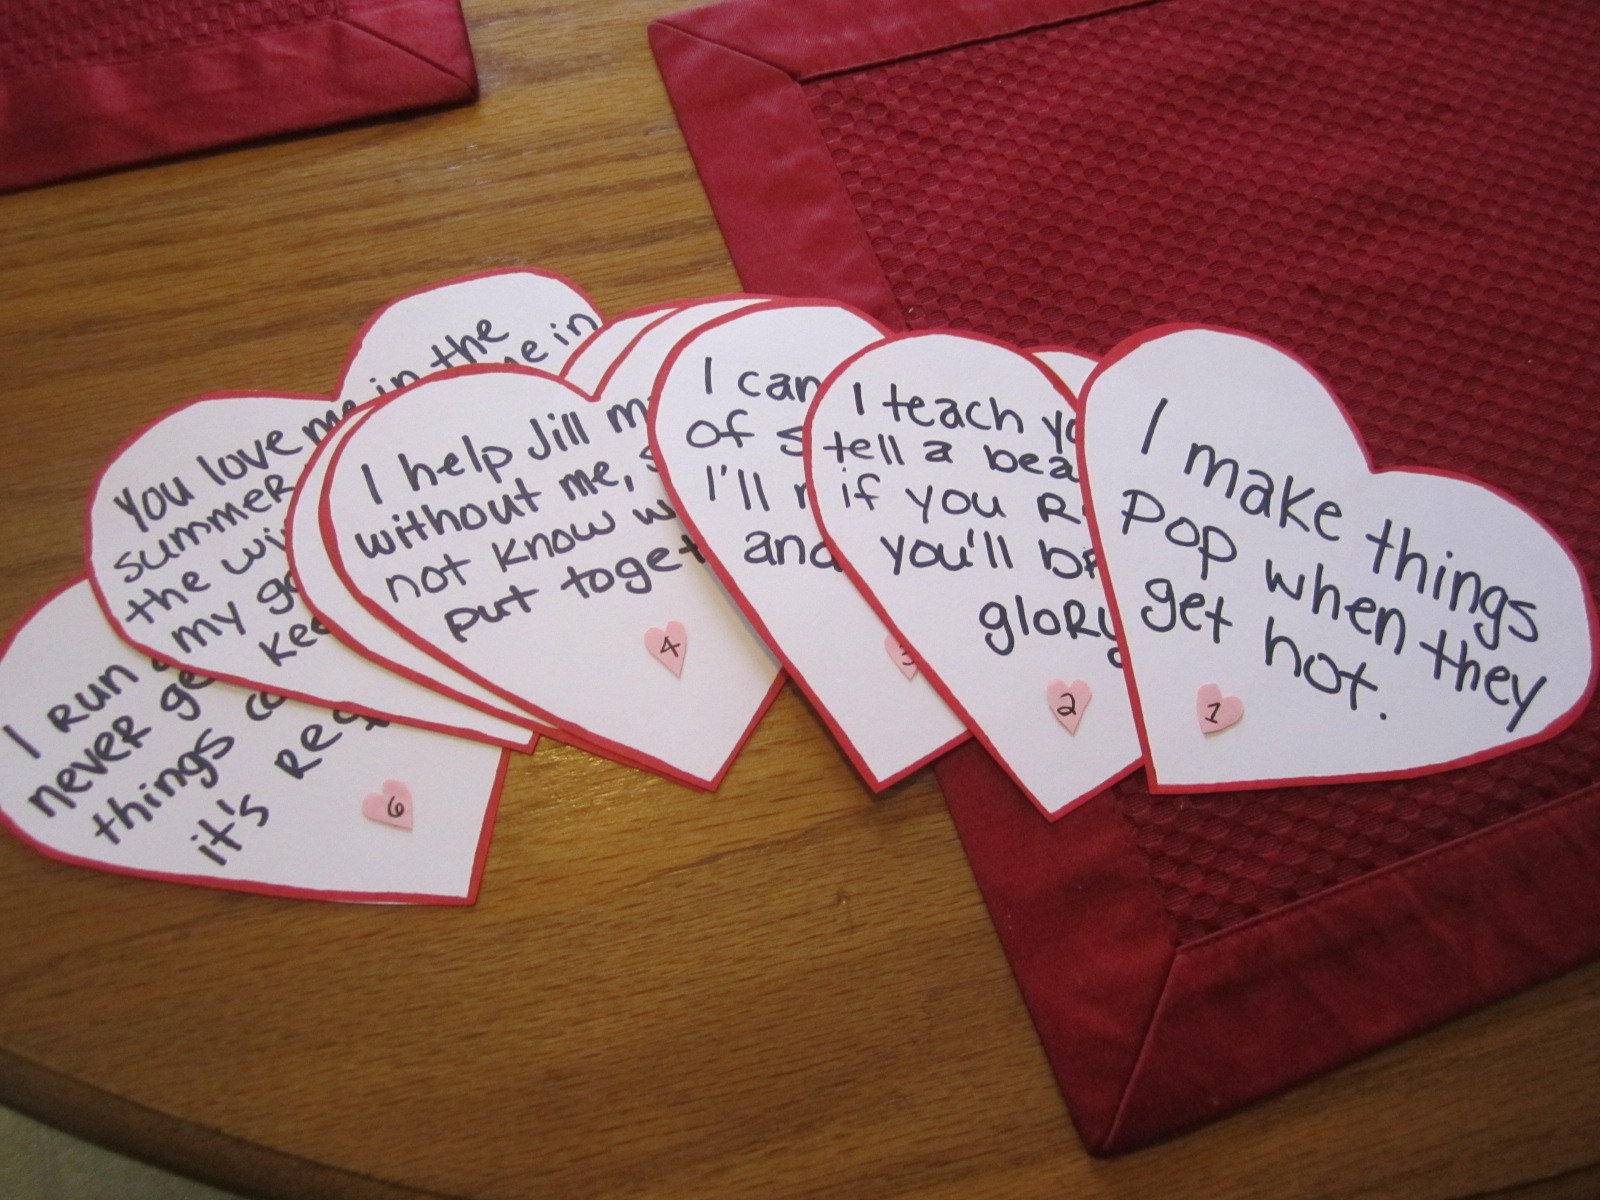 Valentines Day Gift Ideas Homemade
 Ten DIY Valentine’s Day Gifts for him and her